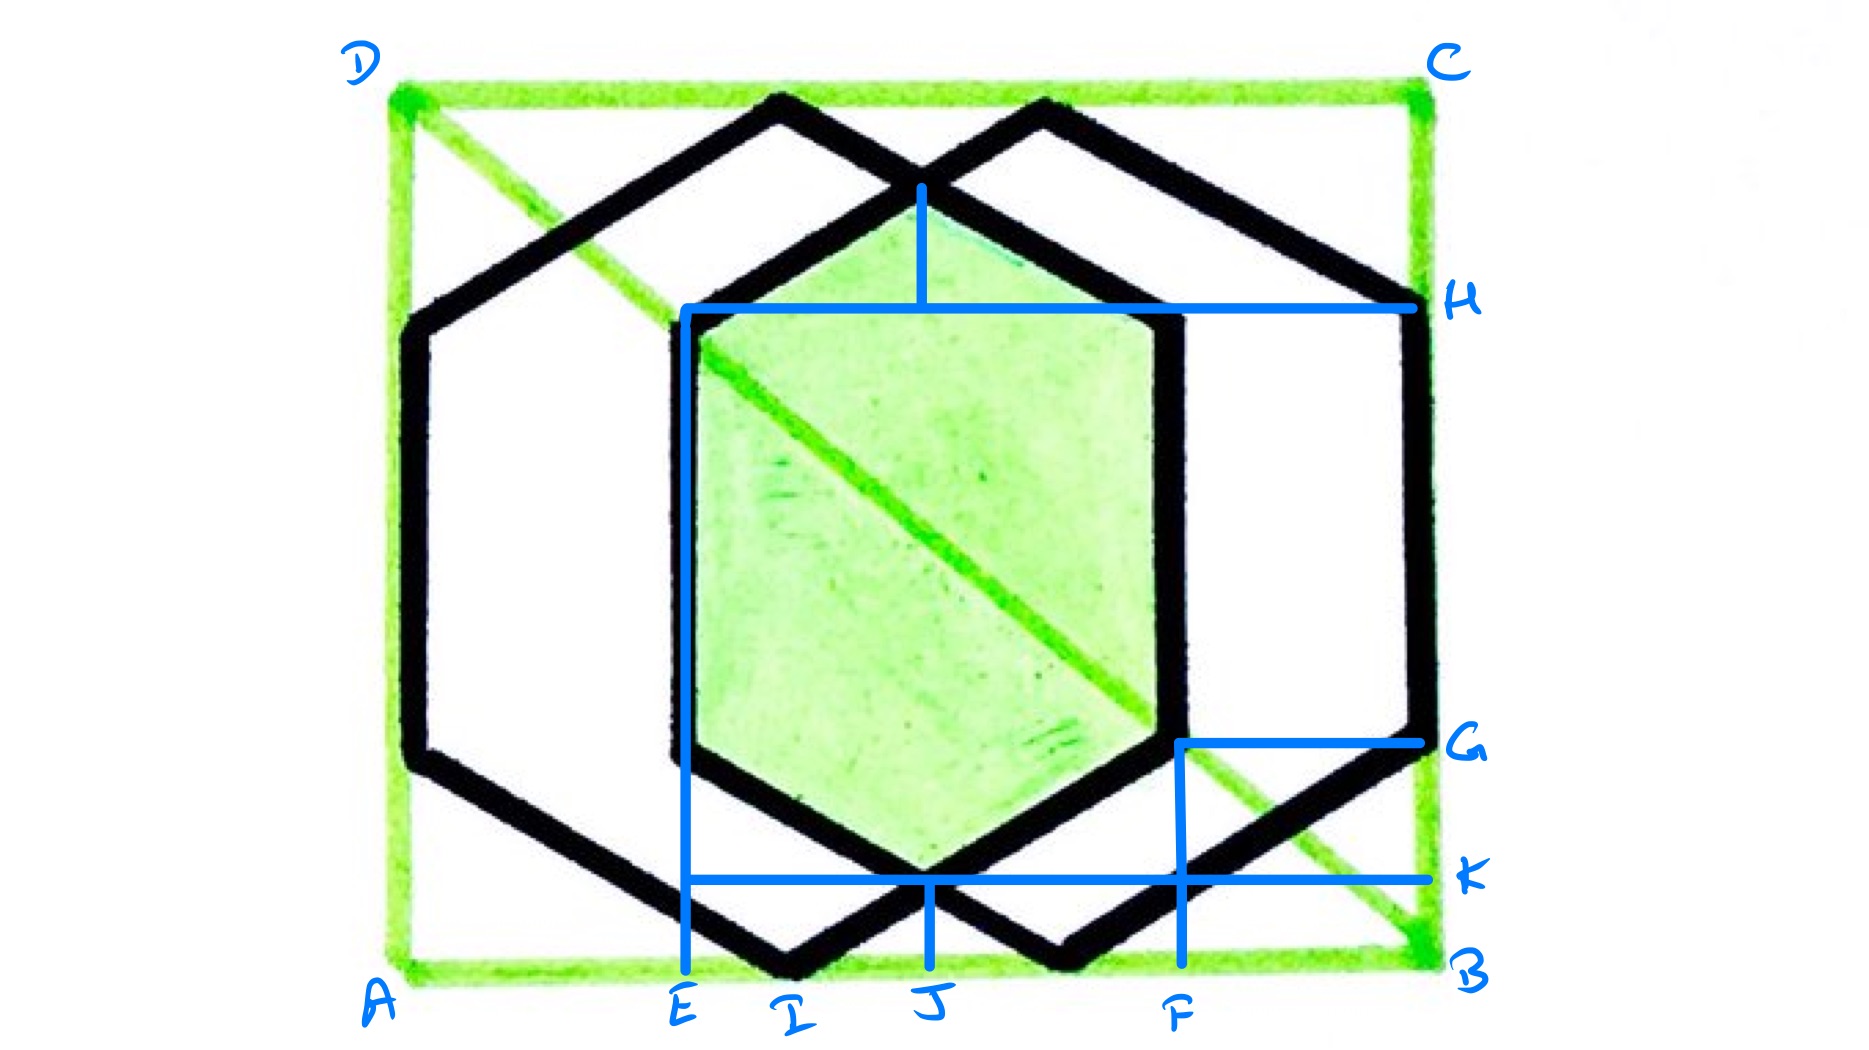 Two overlapping hexagons and a rectangle labelled